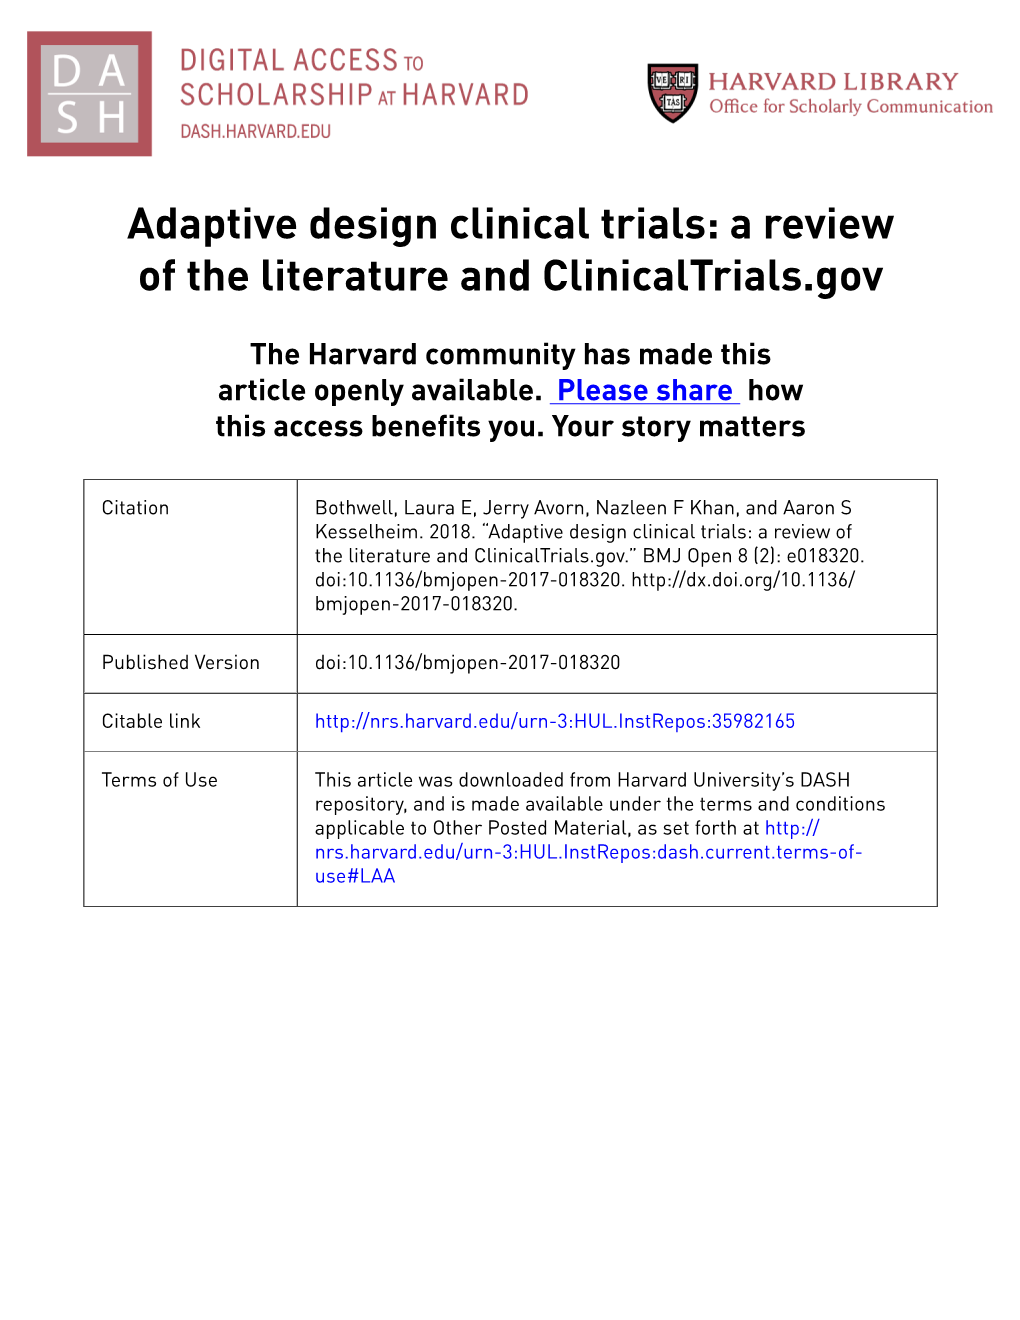 Adaptive Design Clinical Trials: a Review of the Literature and Clinicaltrials.Gov